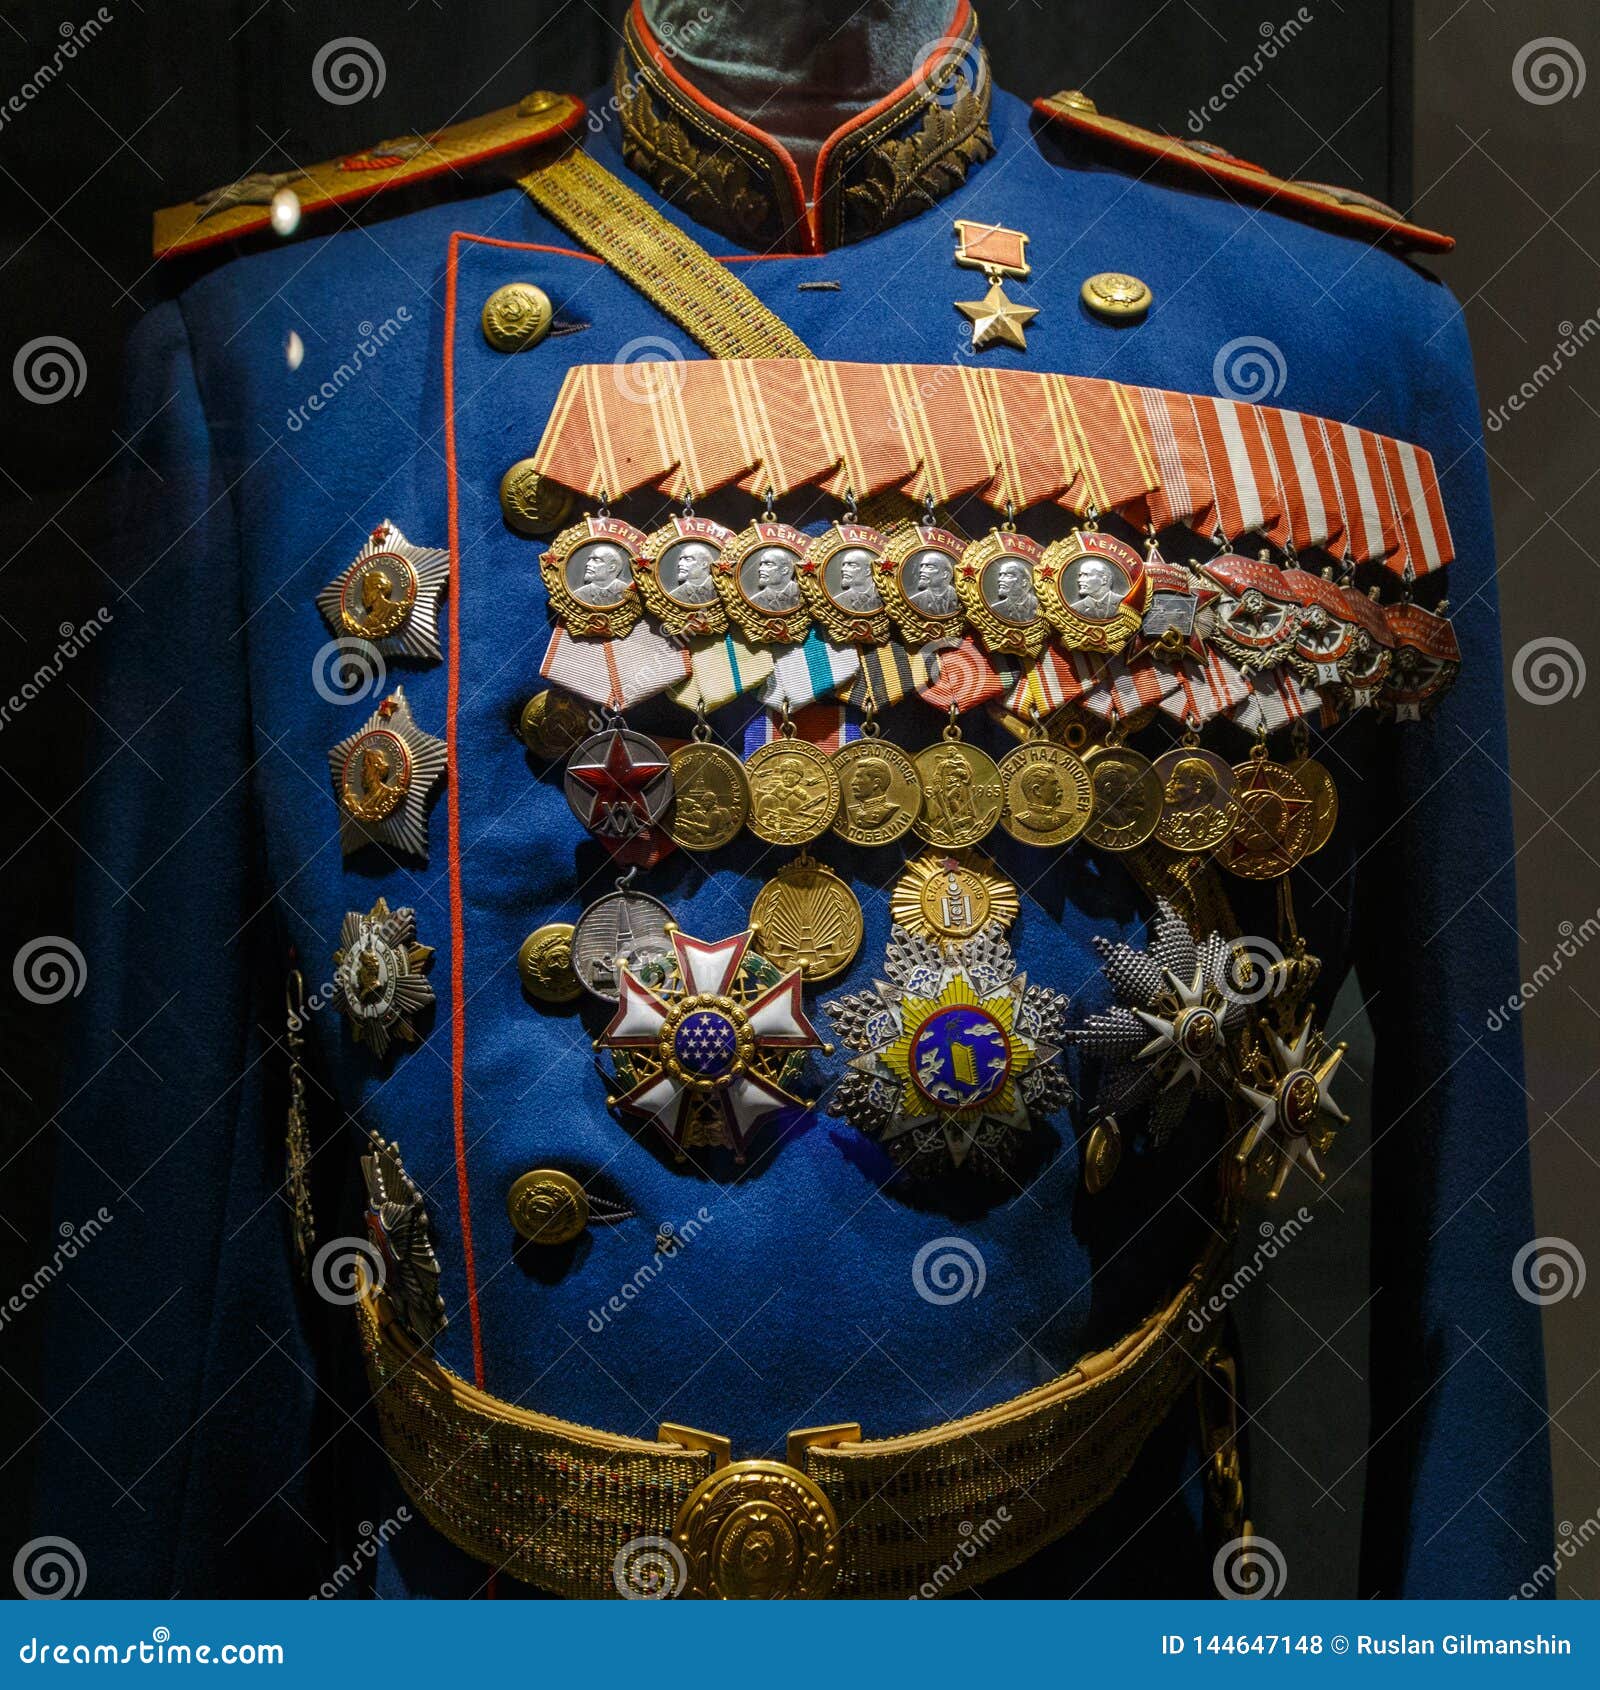 100 YEARS OF ARMED FORCES OF RUSSIA Details about   2018 RUSSIA AWARD ORDER SOVIET ARMY 